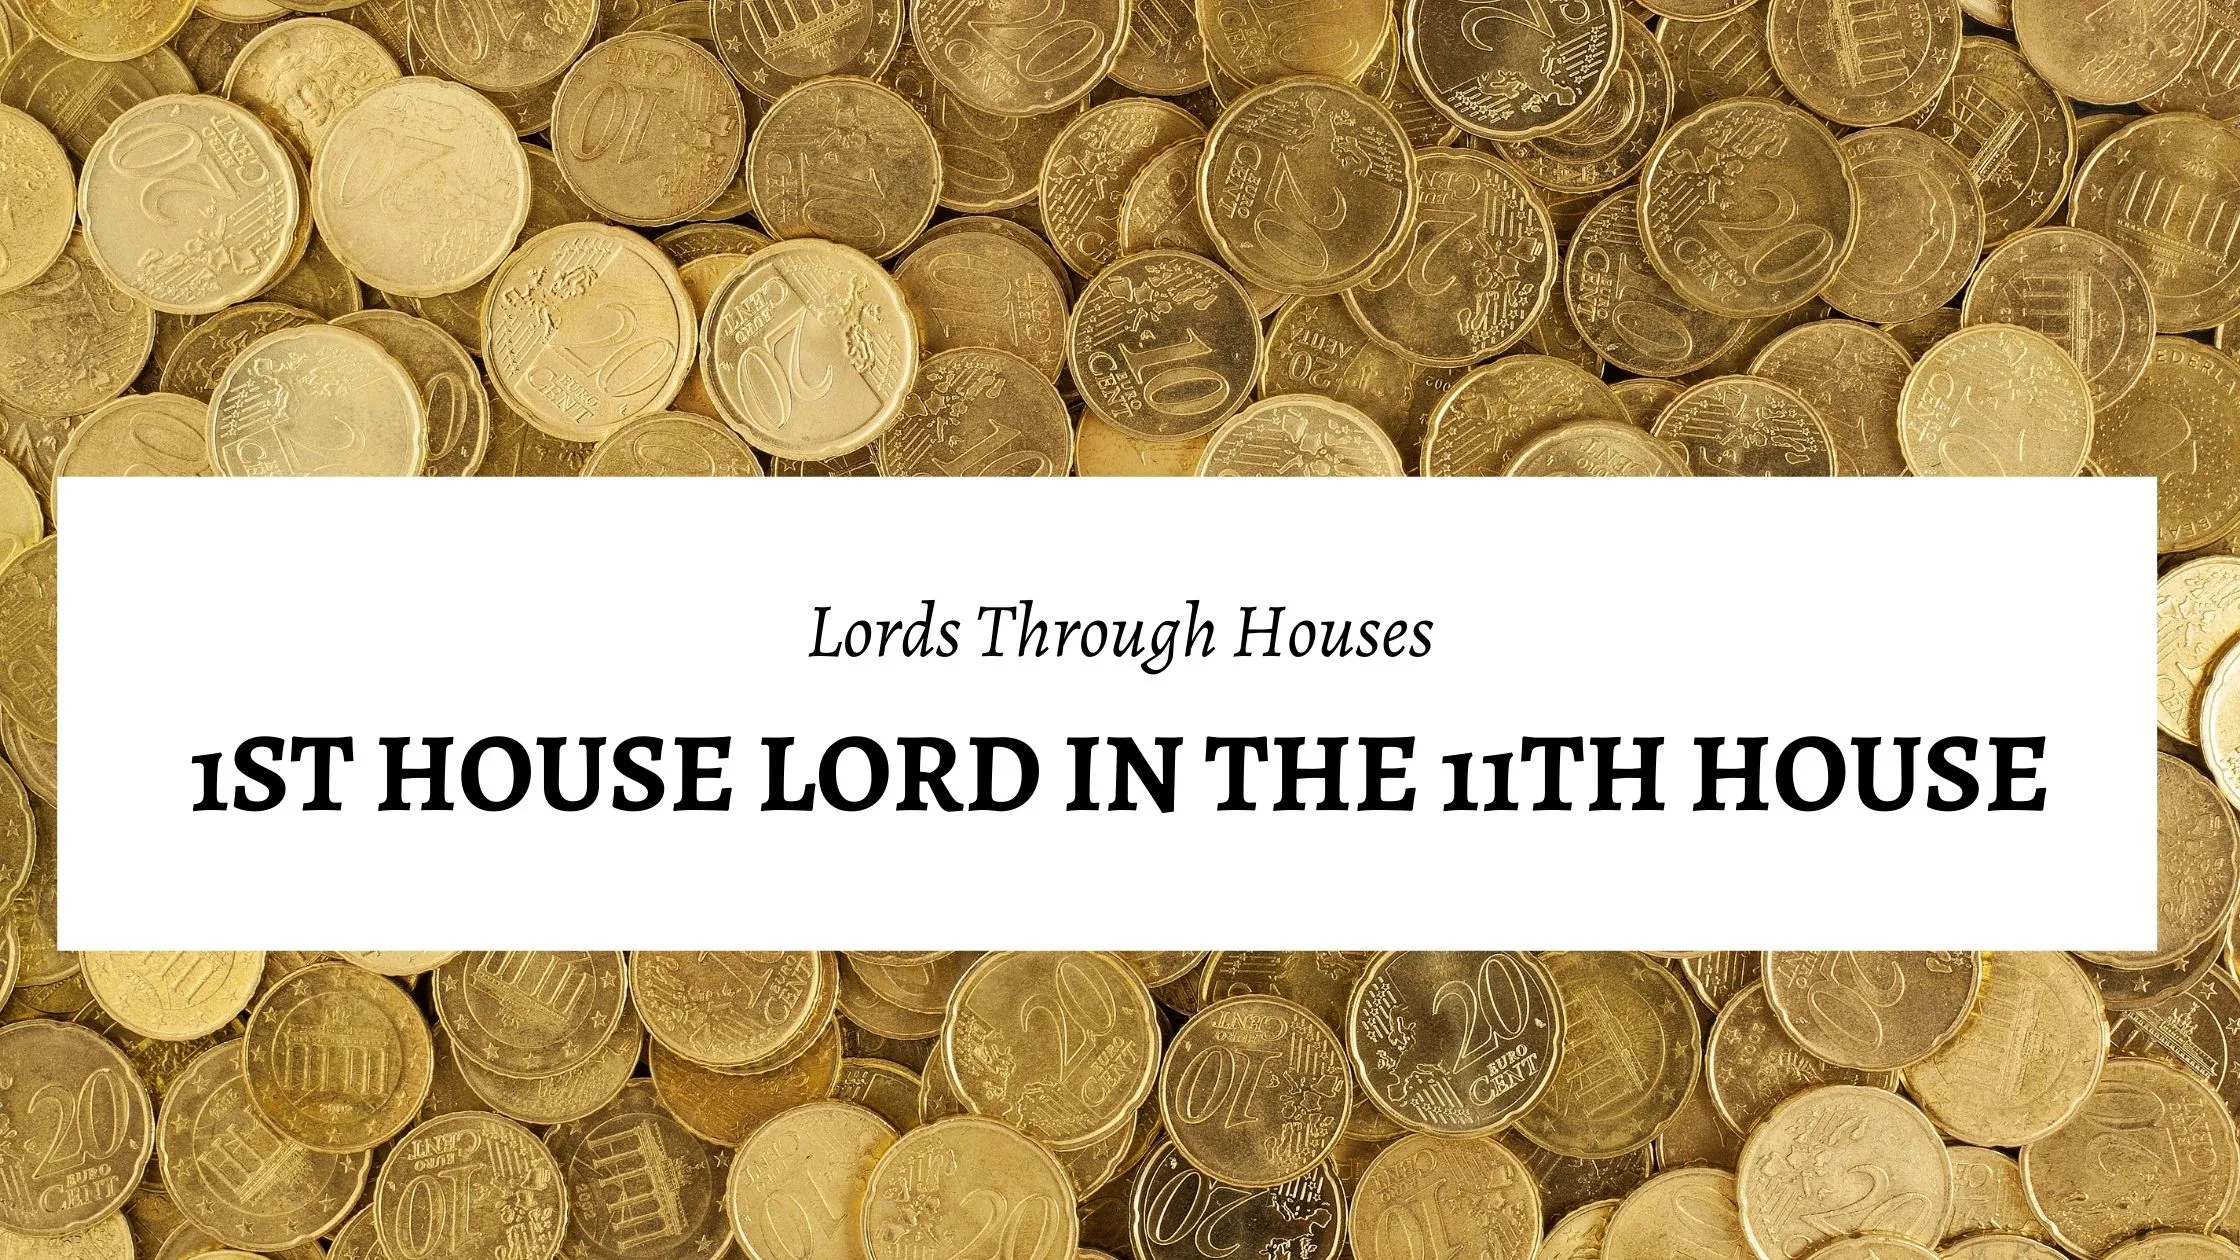 1st house lord in the 11th house Lords through houses